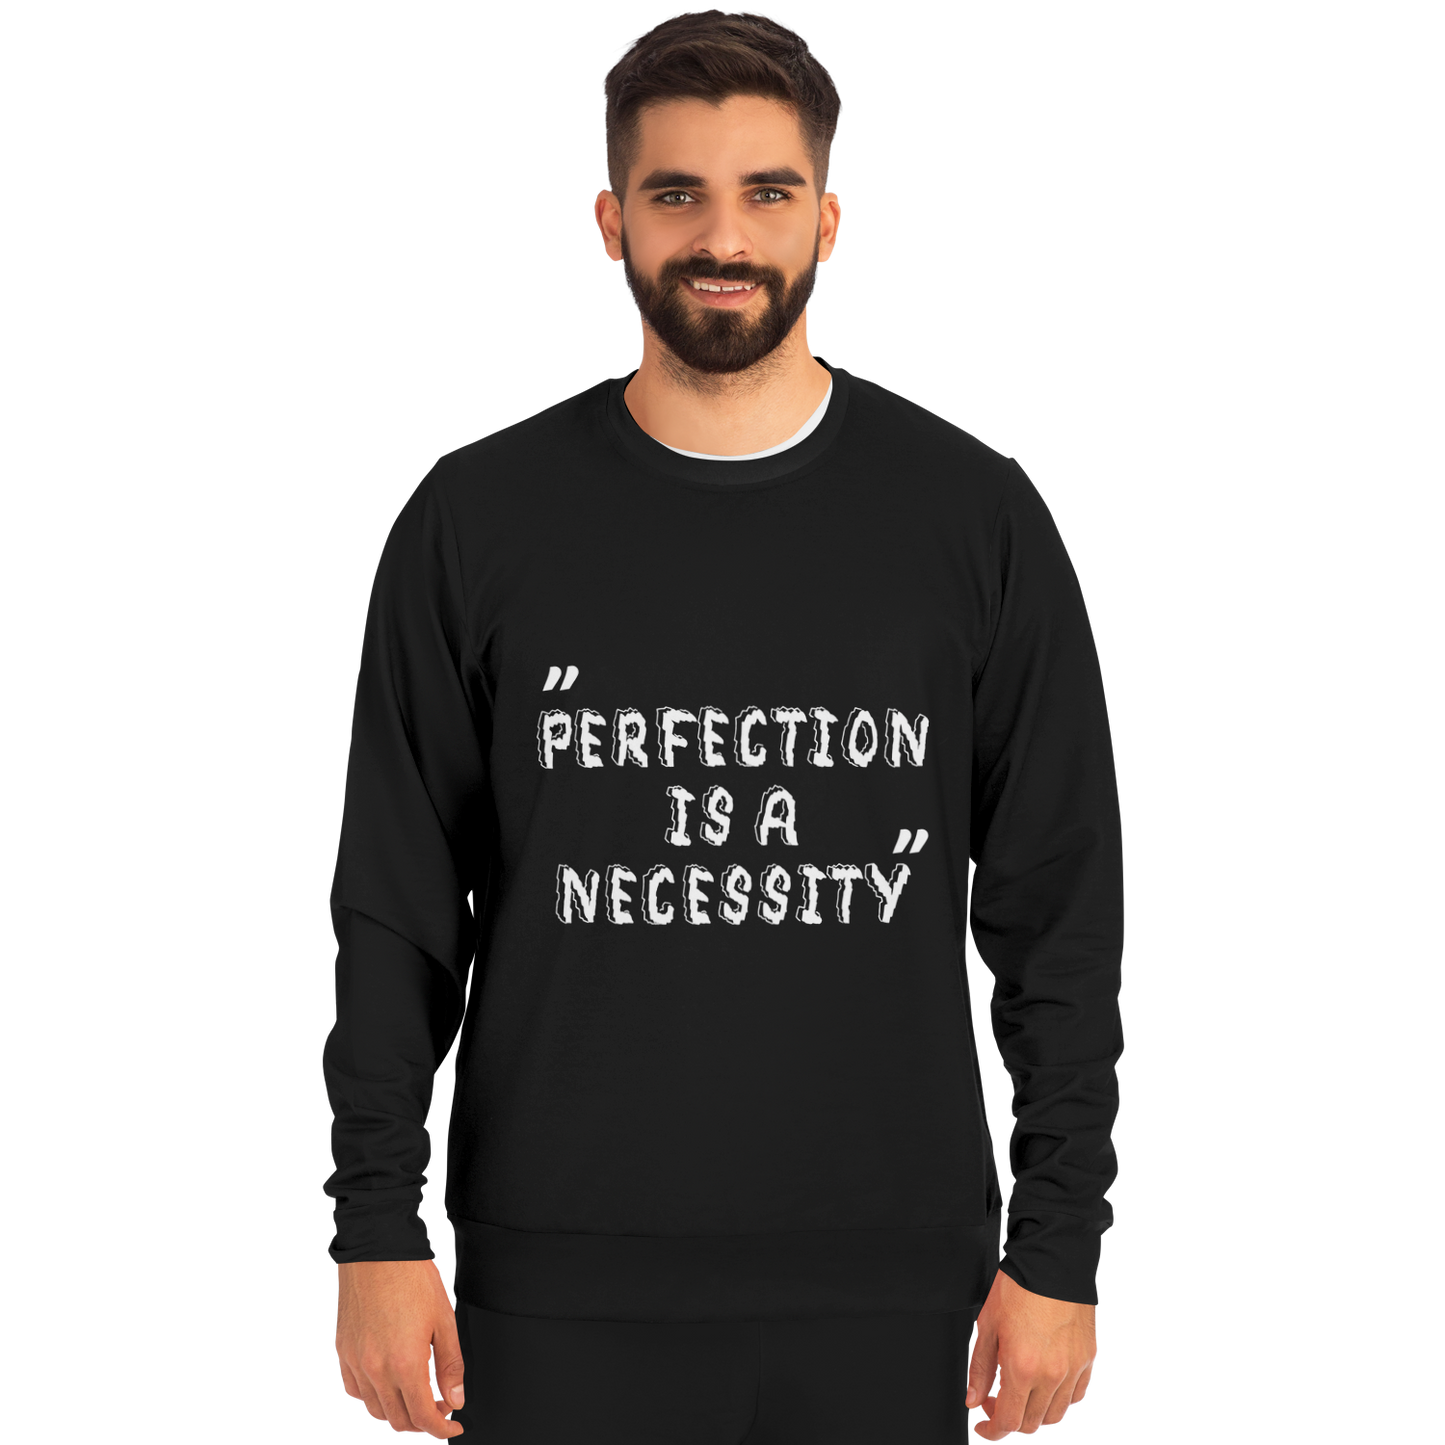 Perfection is a Necessity Winners Win Long Sleeve Shirt Black